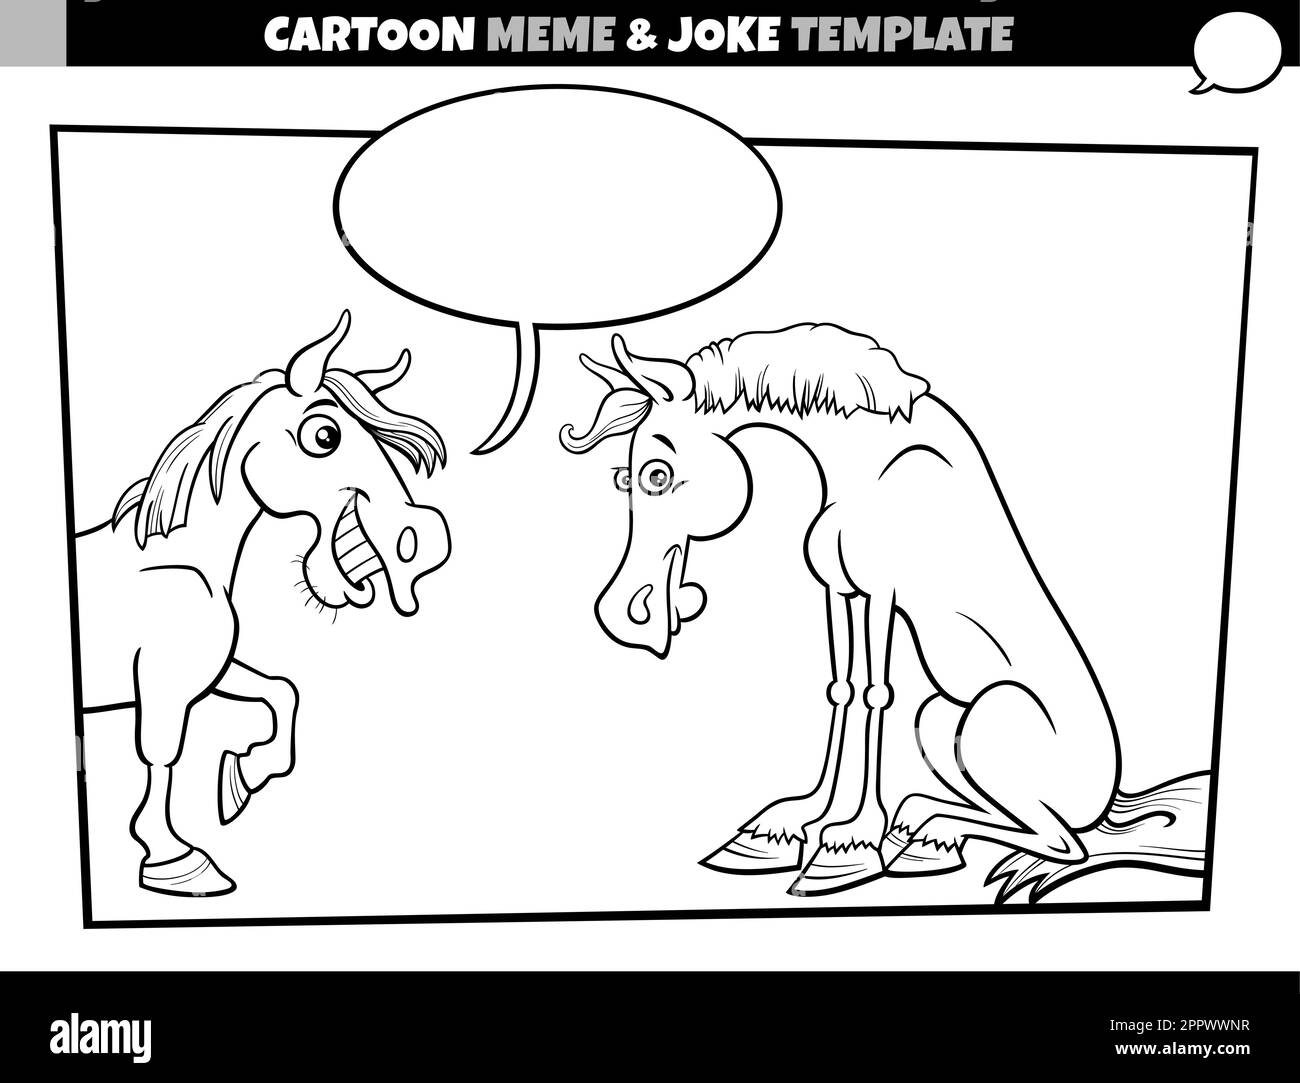 cartoon meme template with speech bubble and comic horses Stock Vector